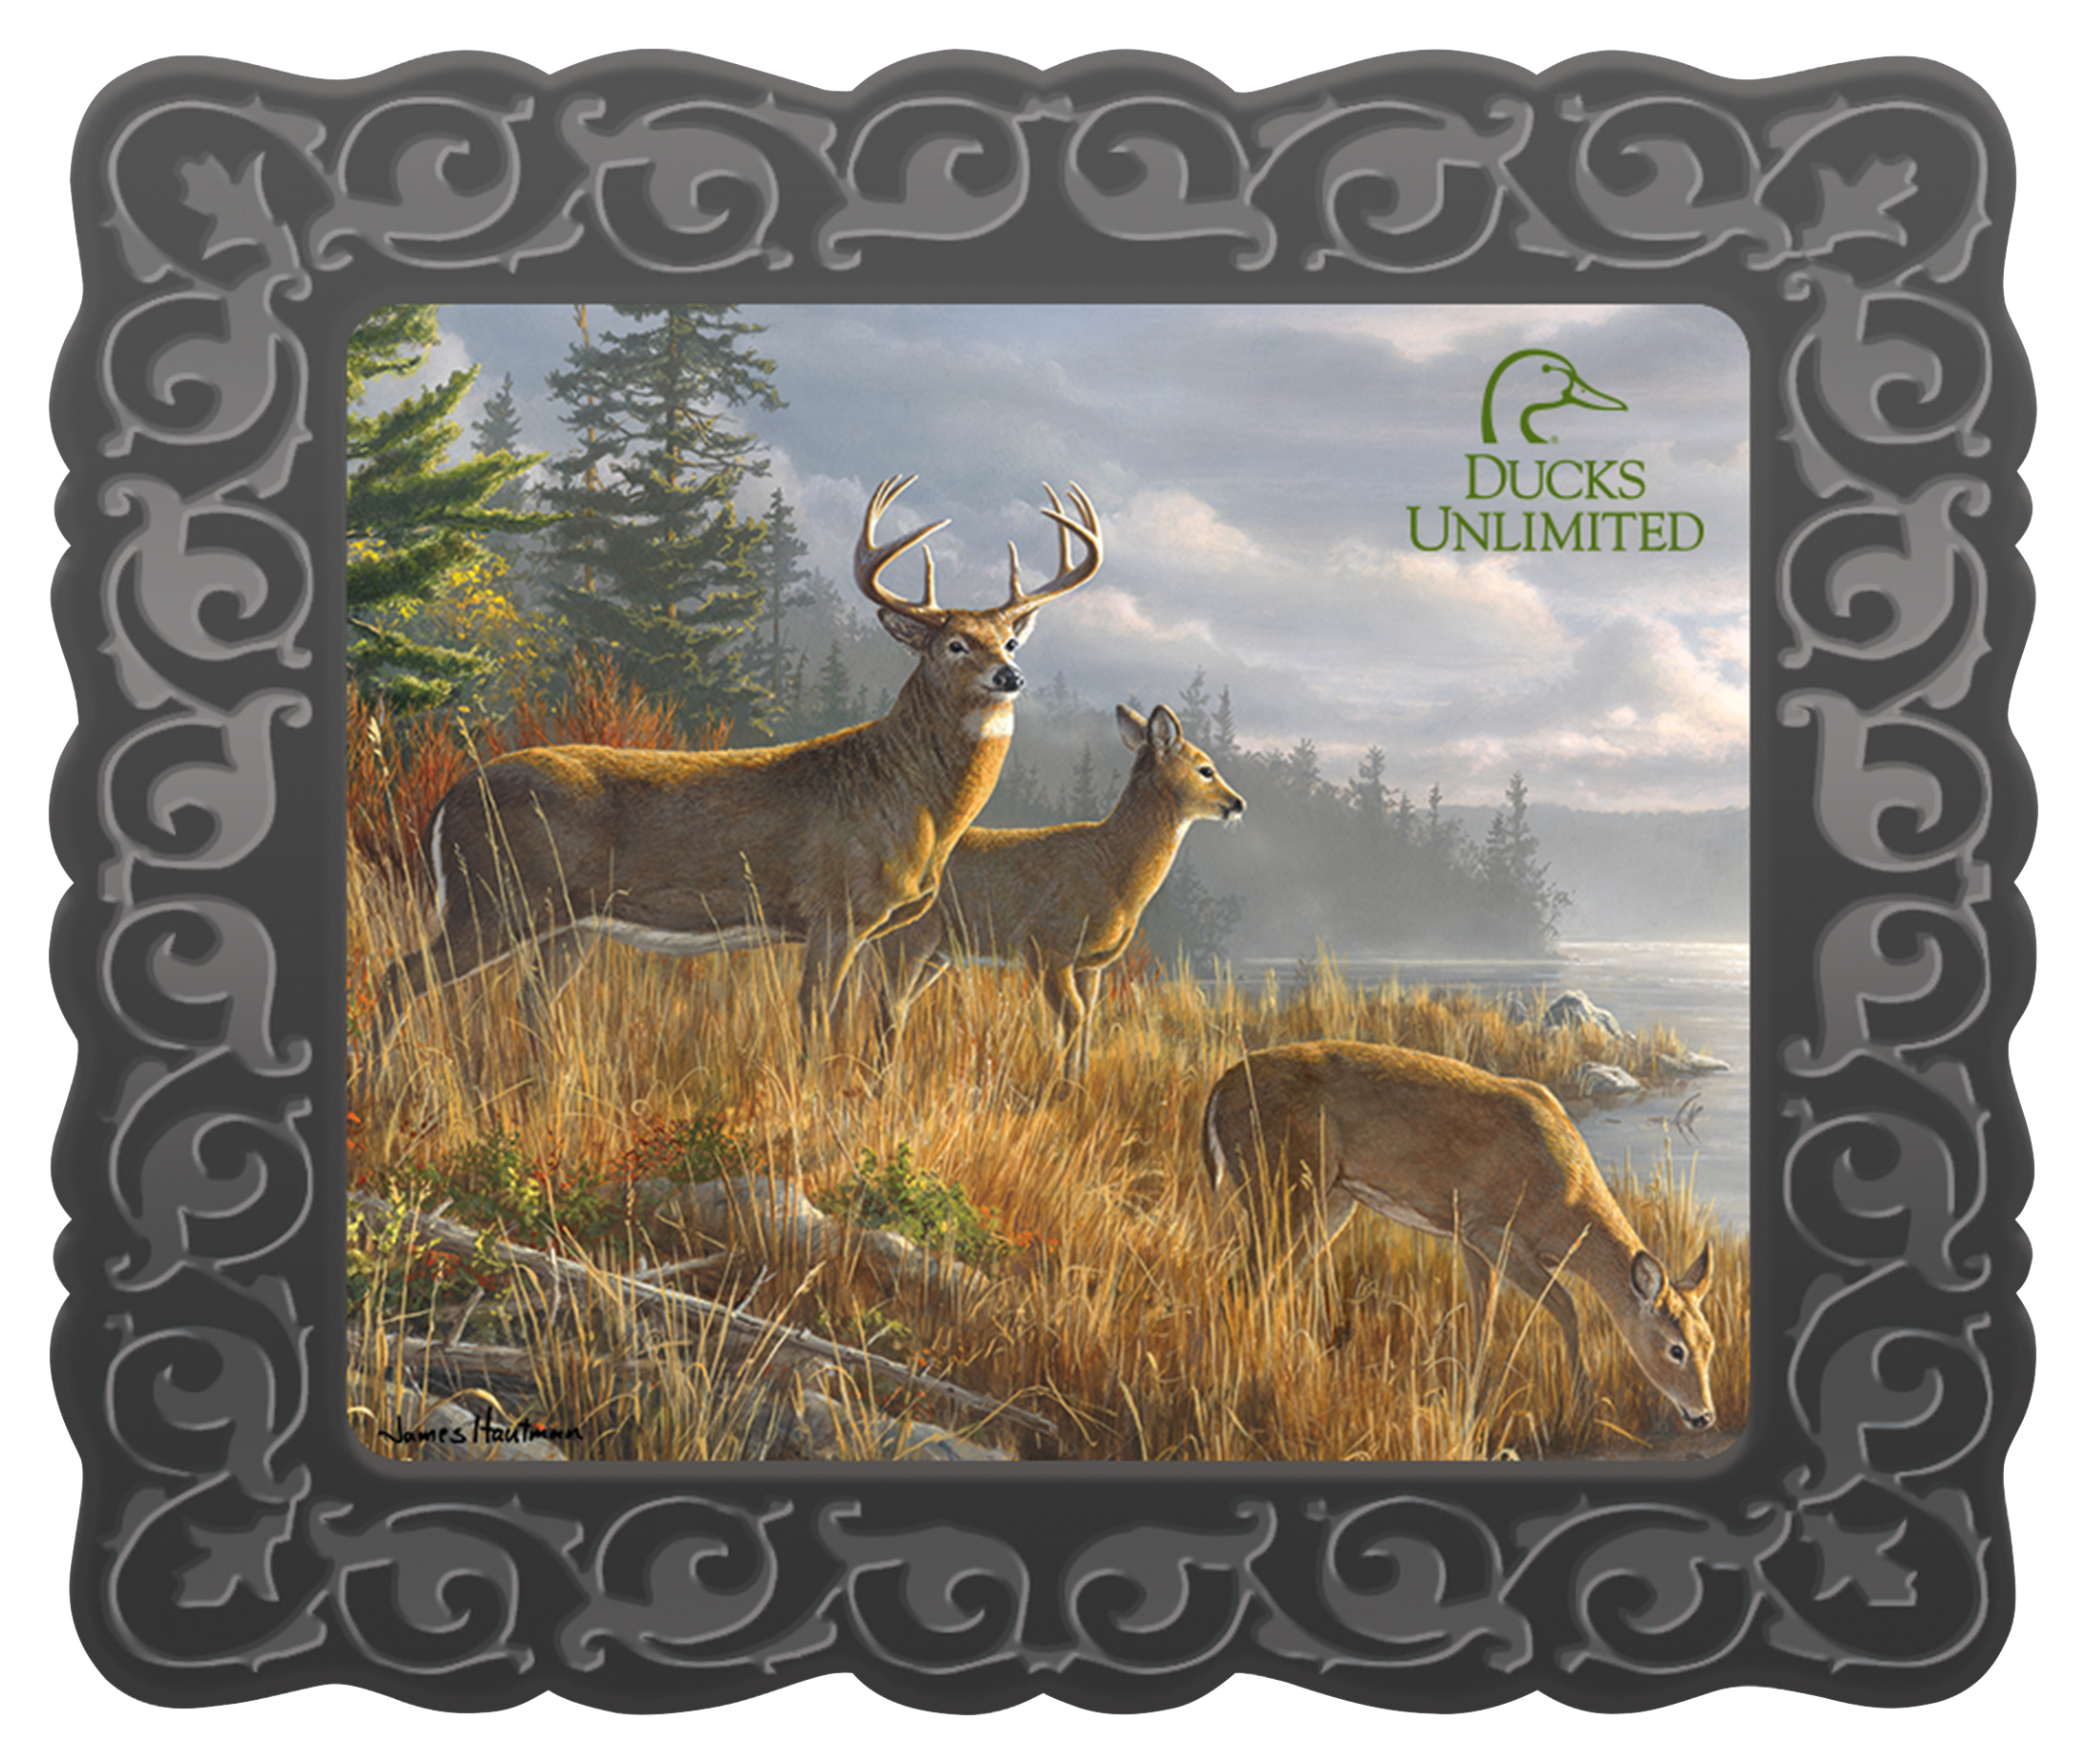 Ducks Unlimited At the Crossing Fridge Magnet